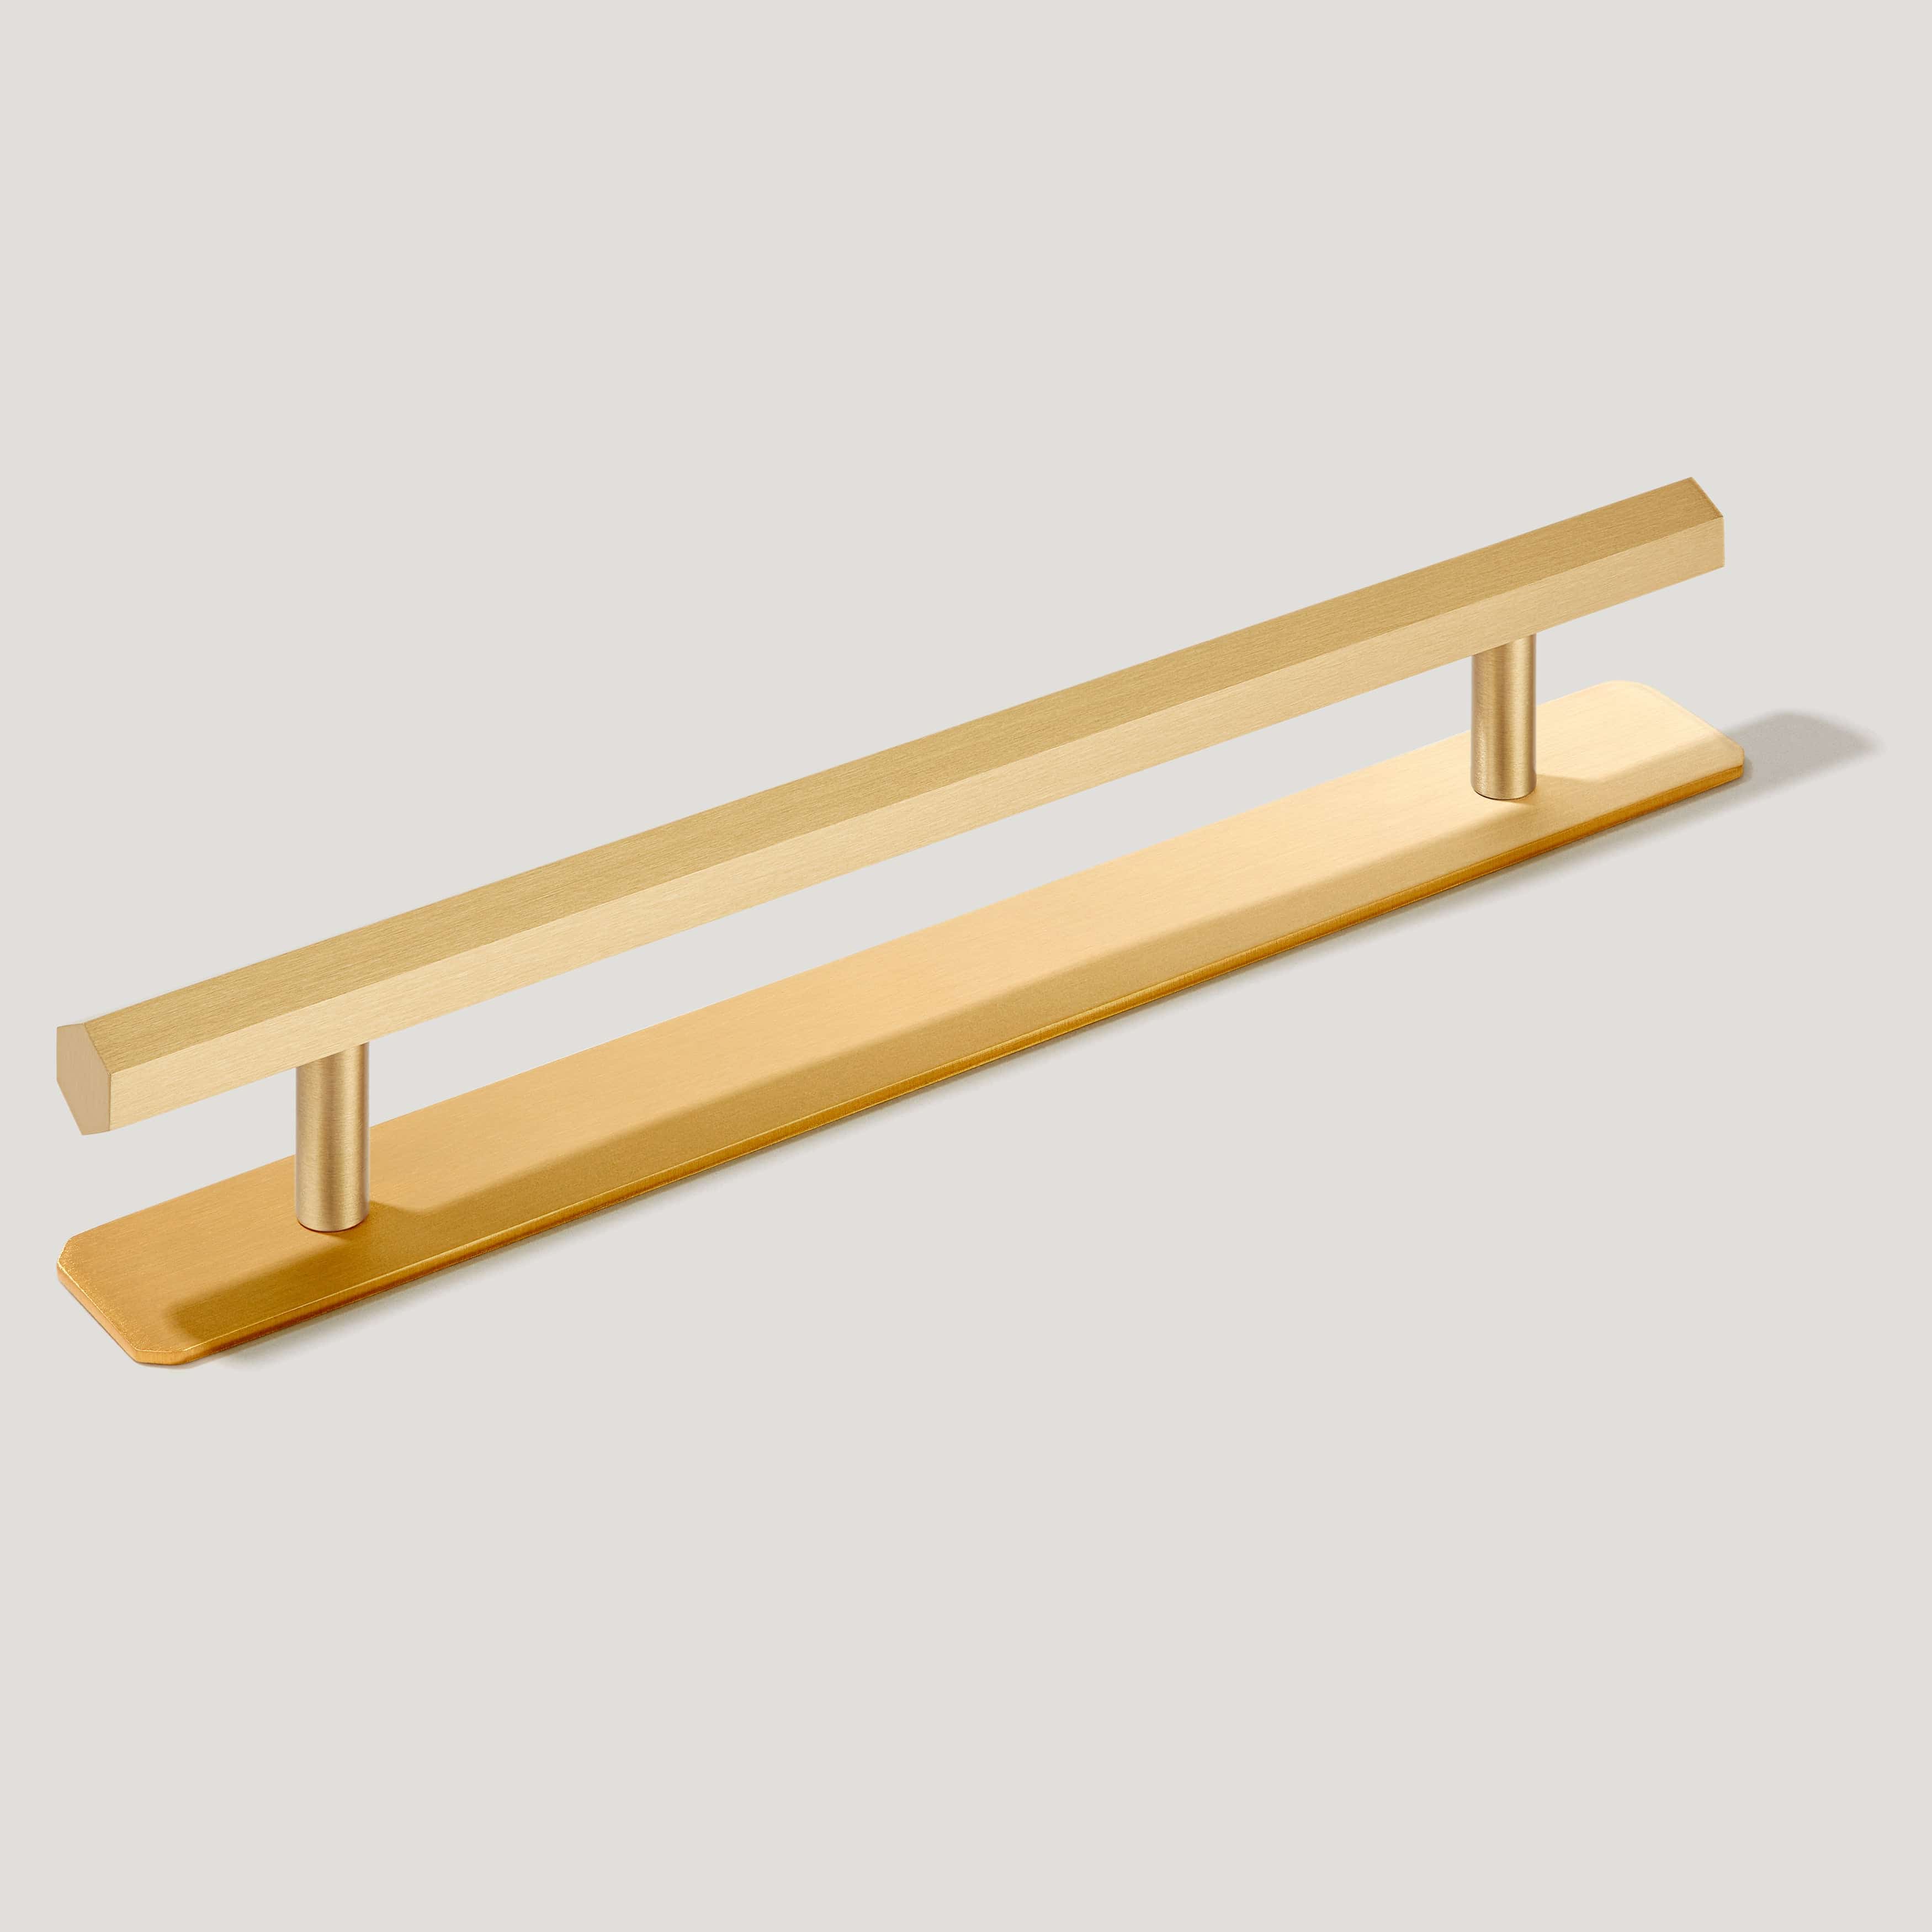 Plank Hardware Handles & Knobs 150mm (96mm CC) / Handle with Backplate HUXLEY Hexagonal Handle - Brass